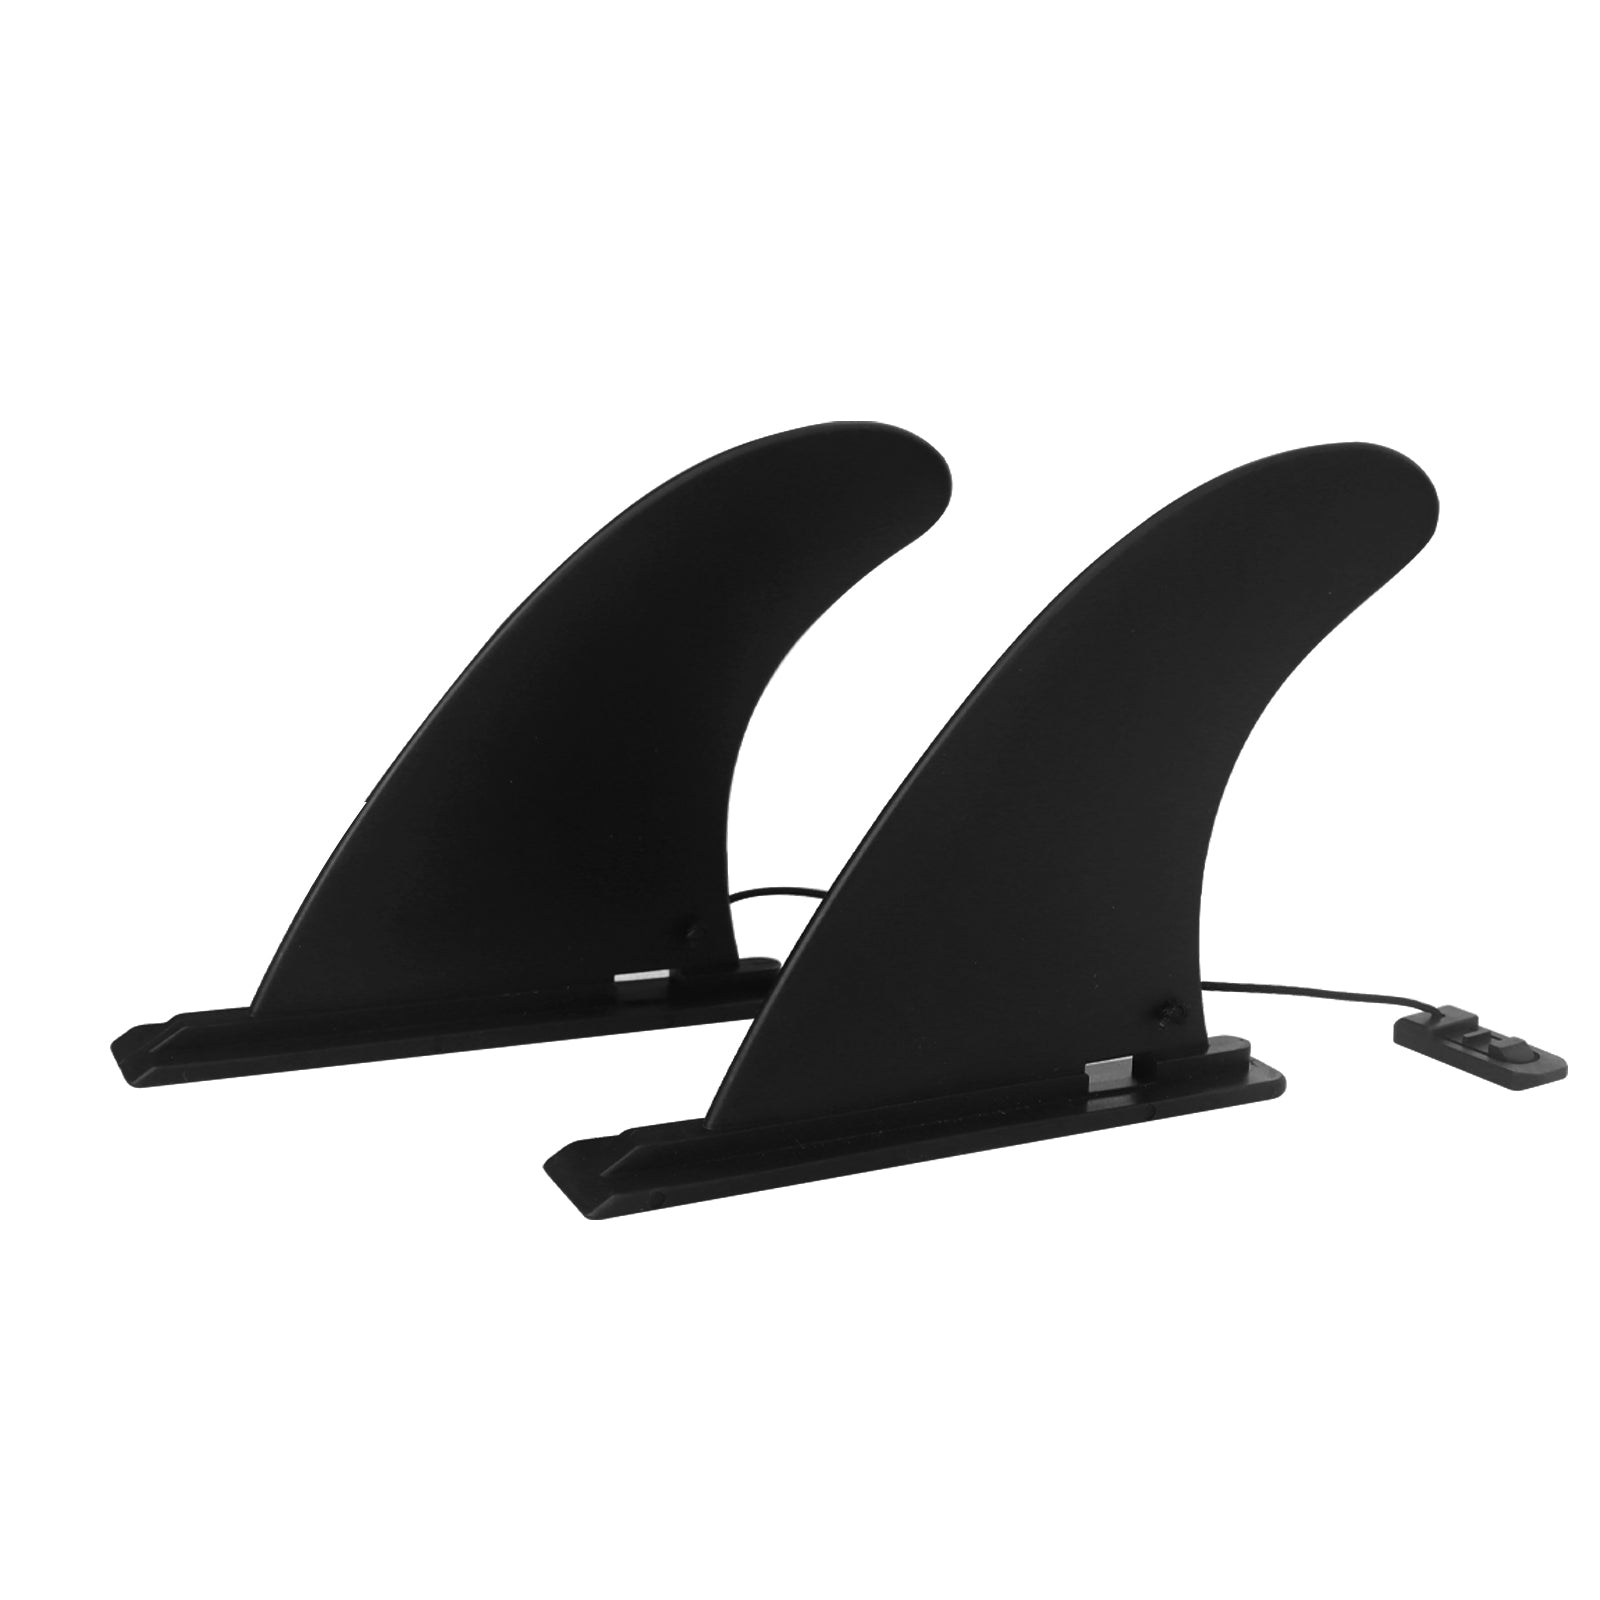 TIGERXBANG-Replacement Fin & Small Fins & 3PCS (For Other Models)